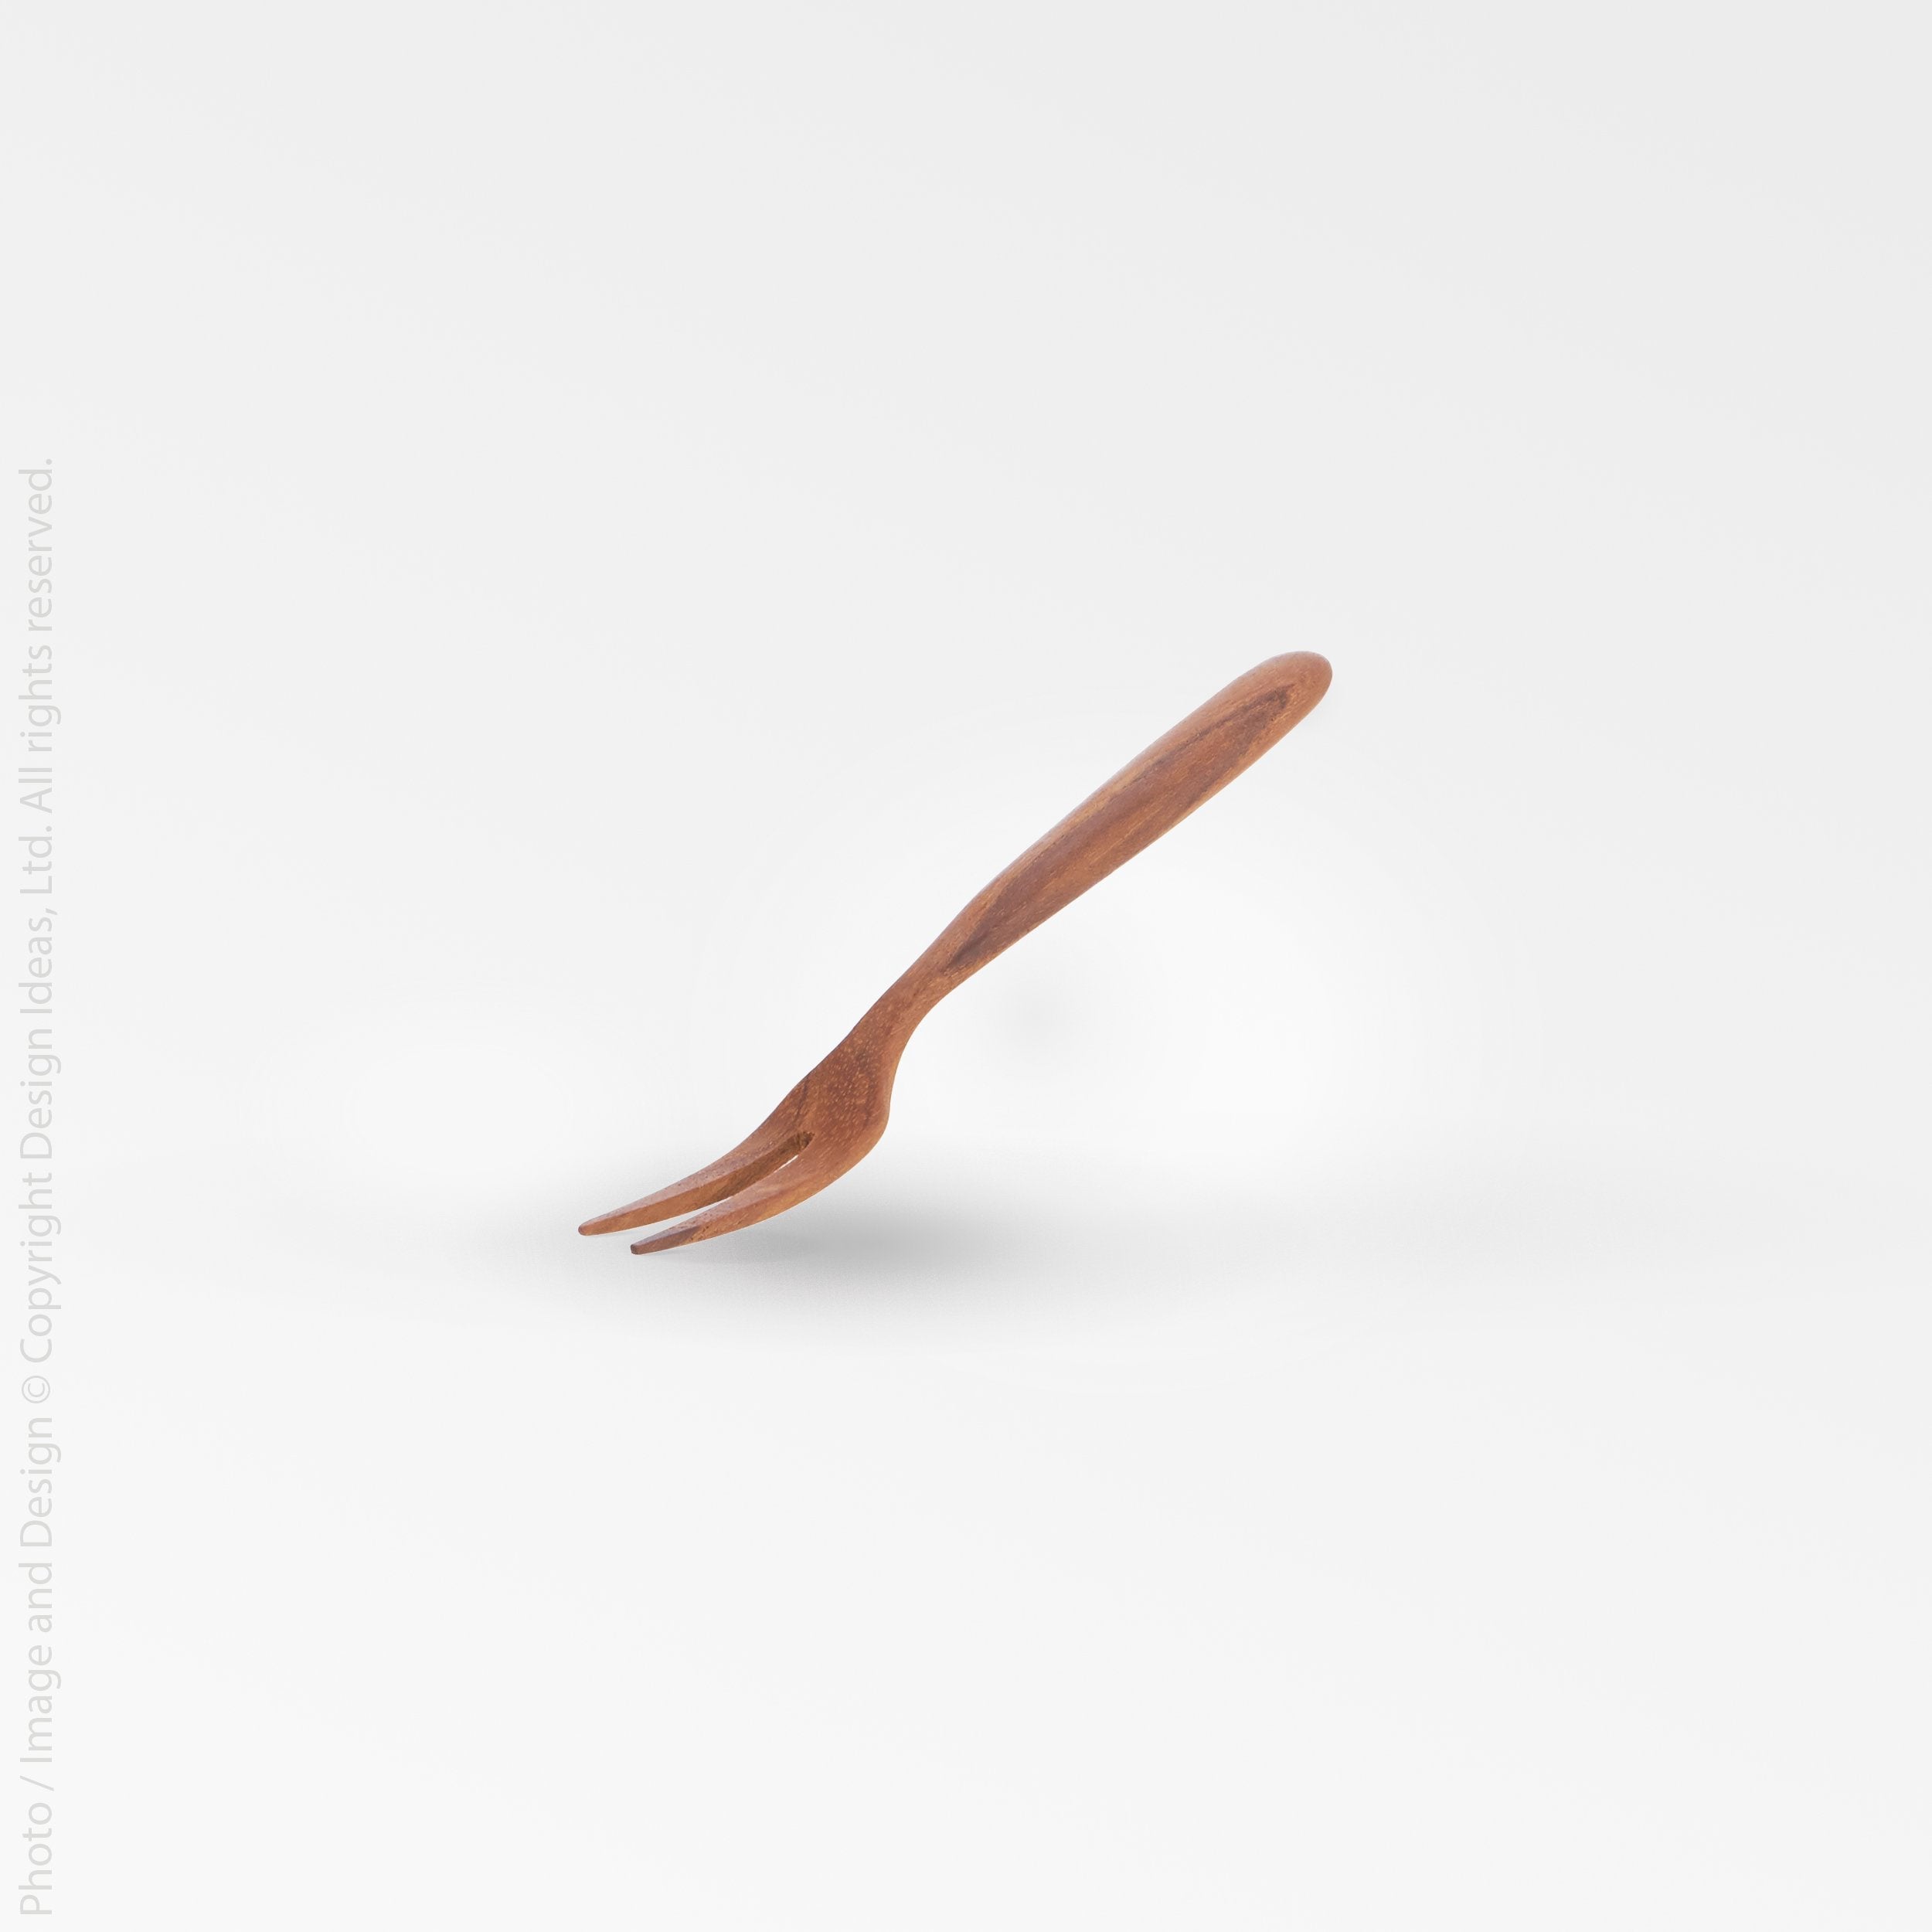 Chiku Teak Fork - Copper Color | Image 1 | From the Chiku Collection | Exquisitely assembled with natural teak for long lasting use | These utensils are sustainably sourced | Available in natural color | texxture home